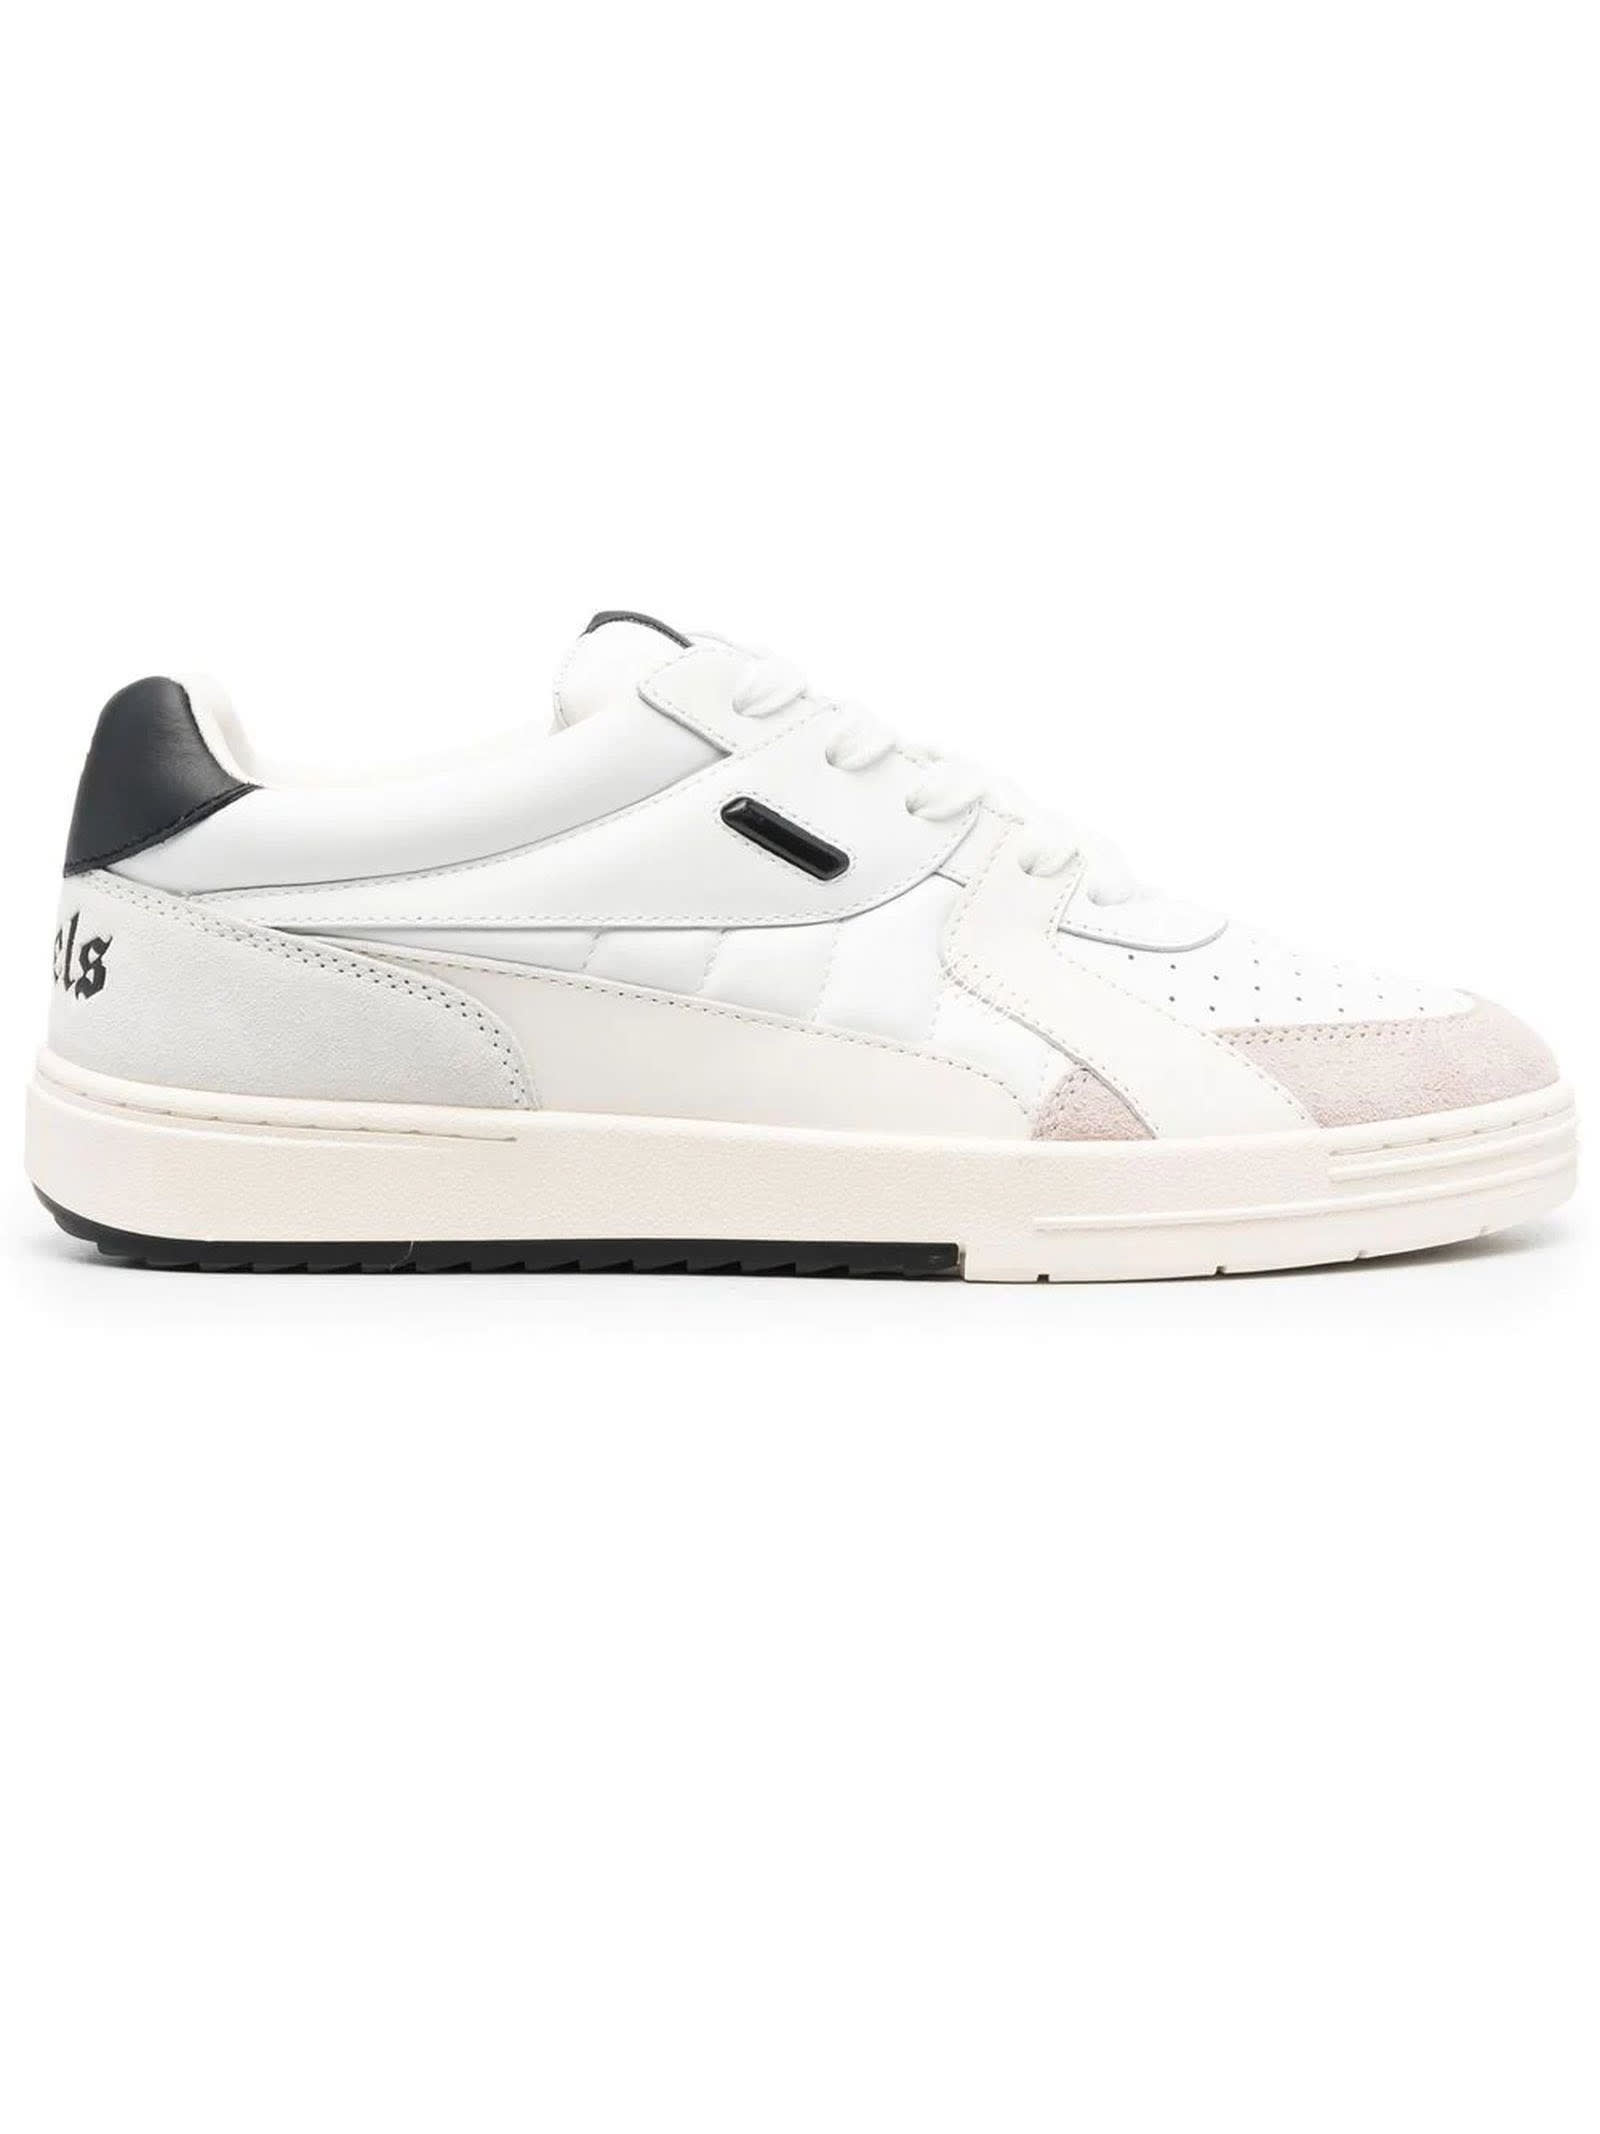 Palm Angels White Calf Leather University Sneakers